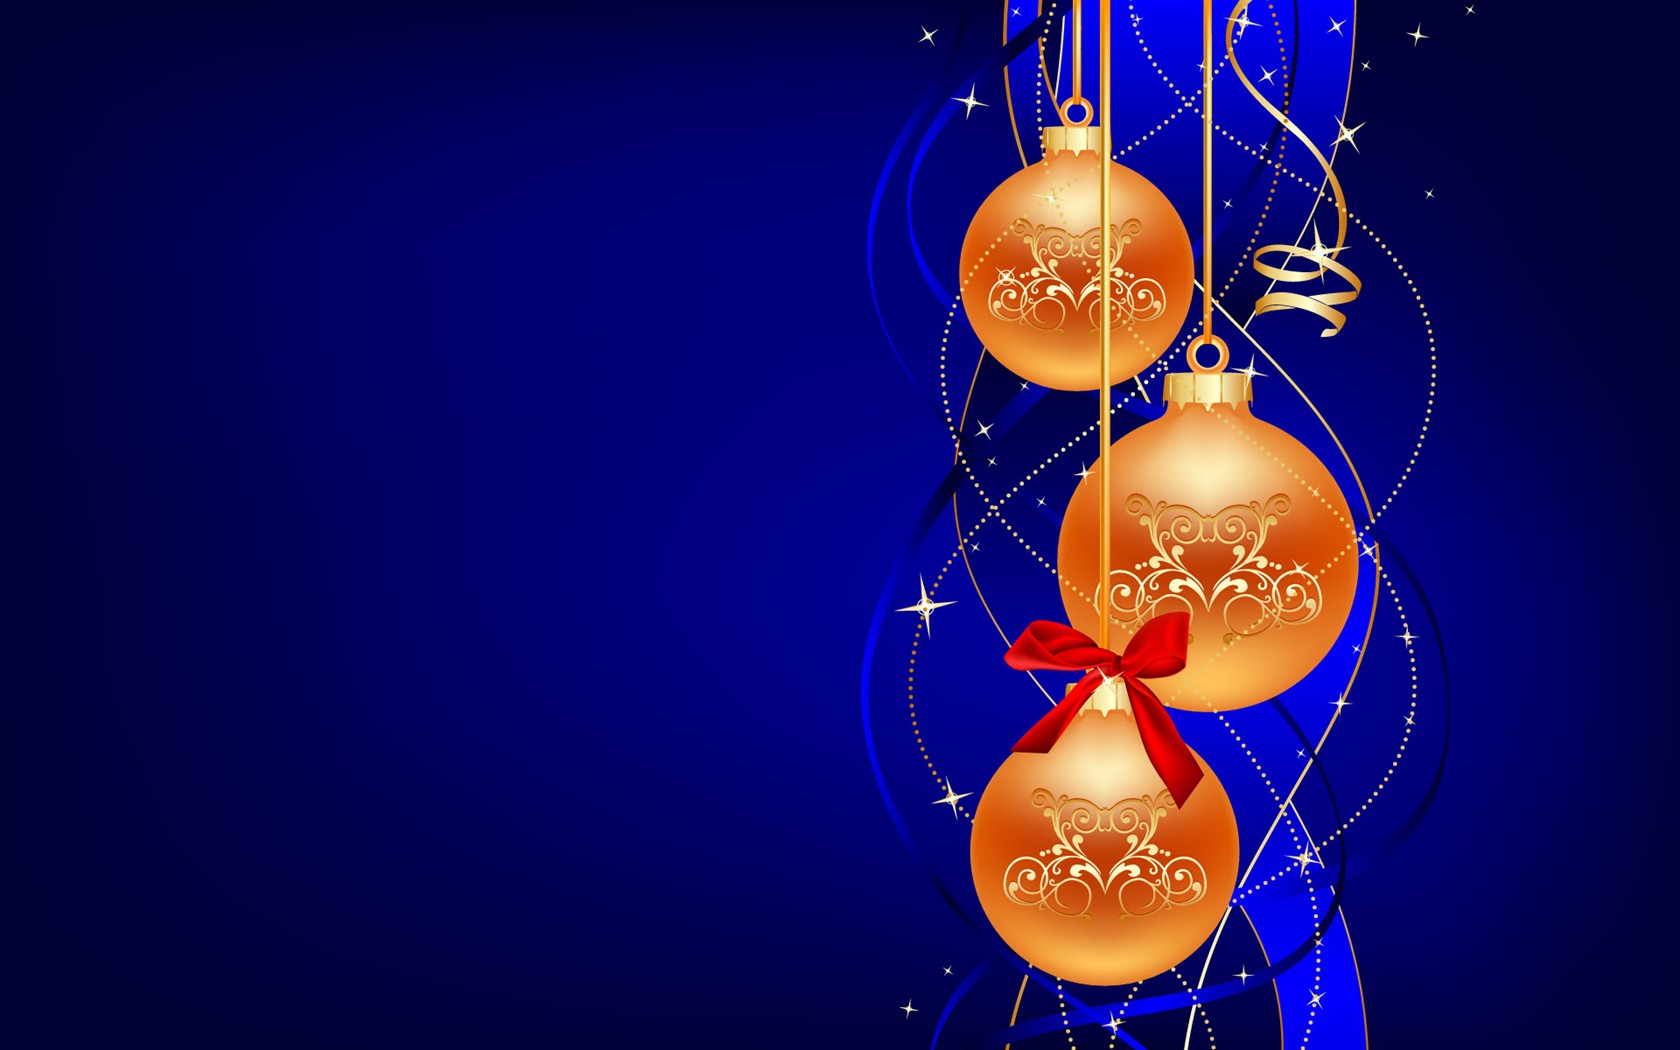 Exquisite Christmas Theme HD Wallpapers #26 - 1680x1050